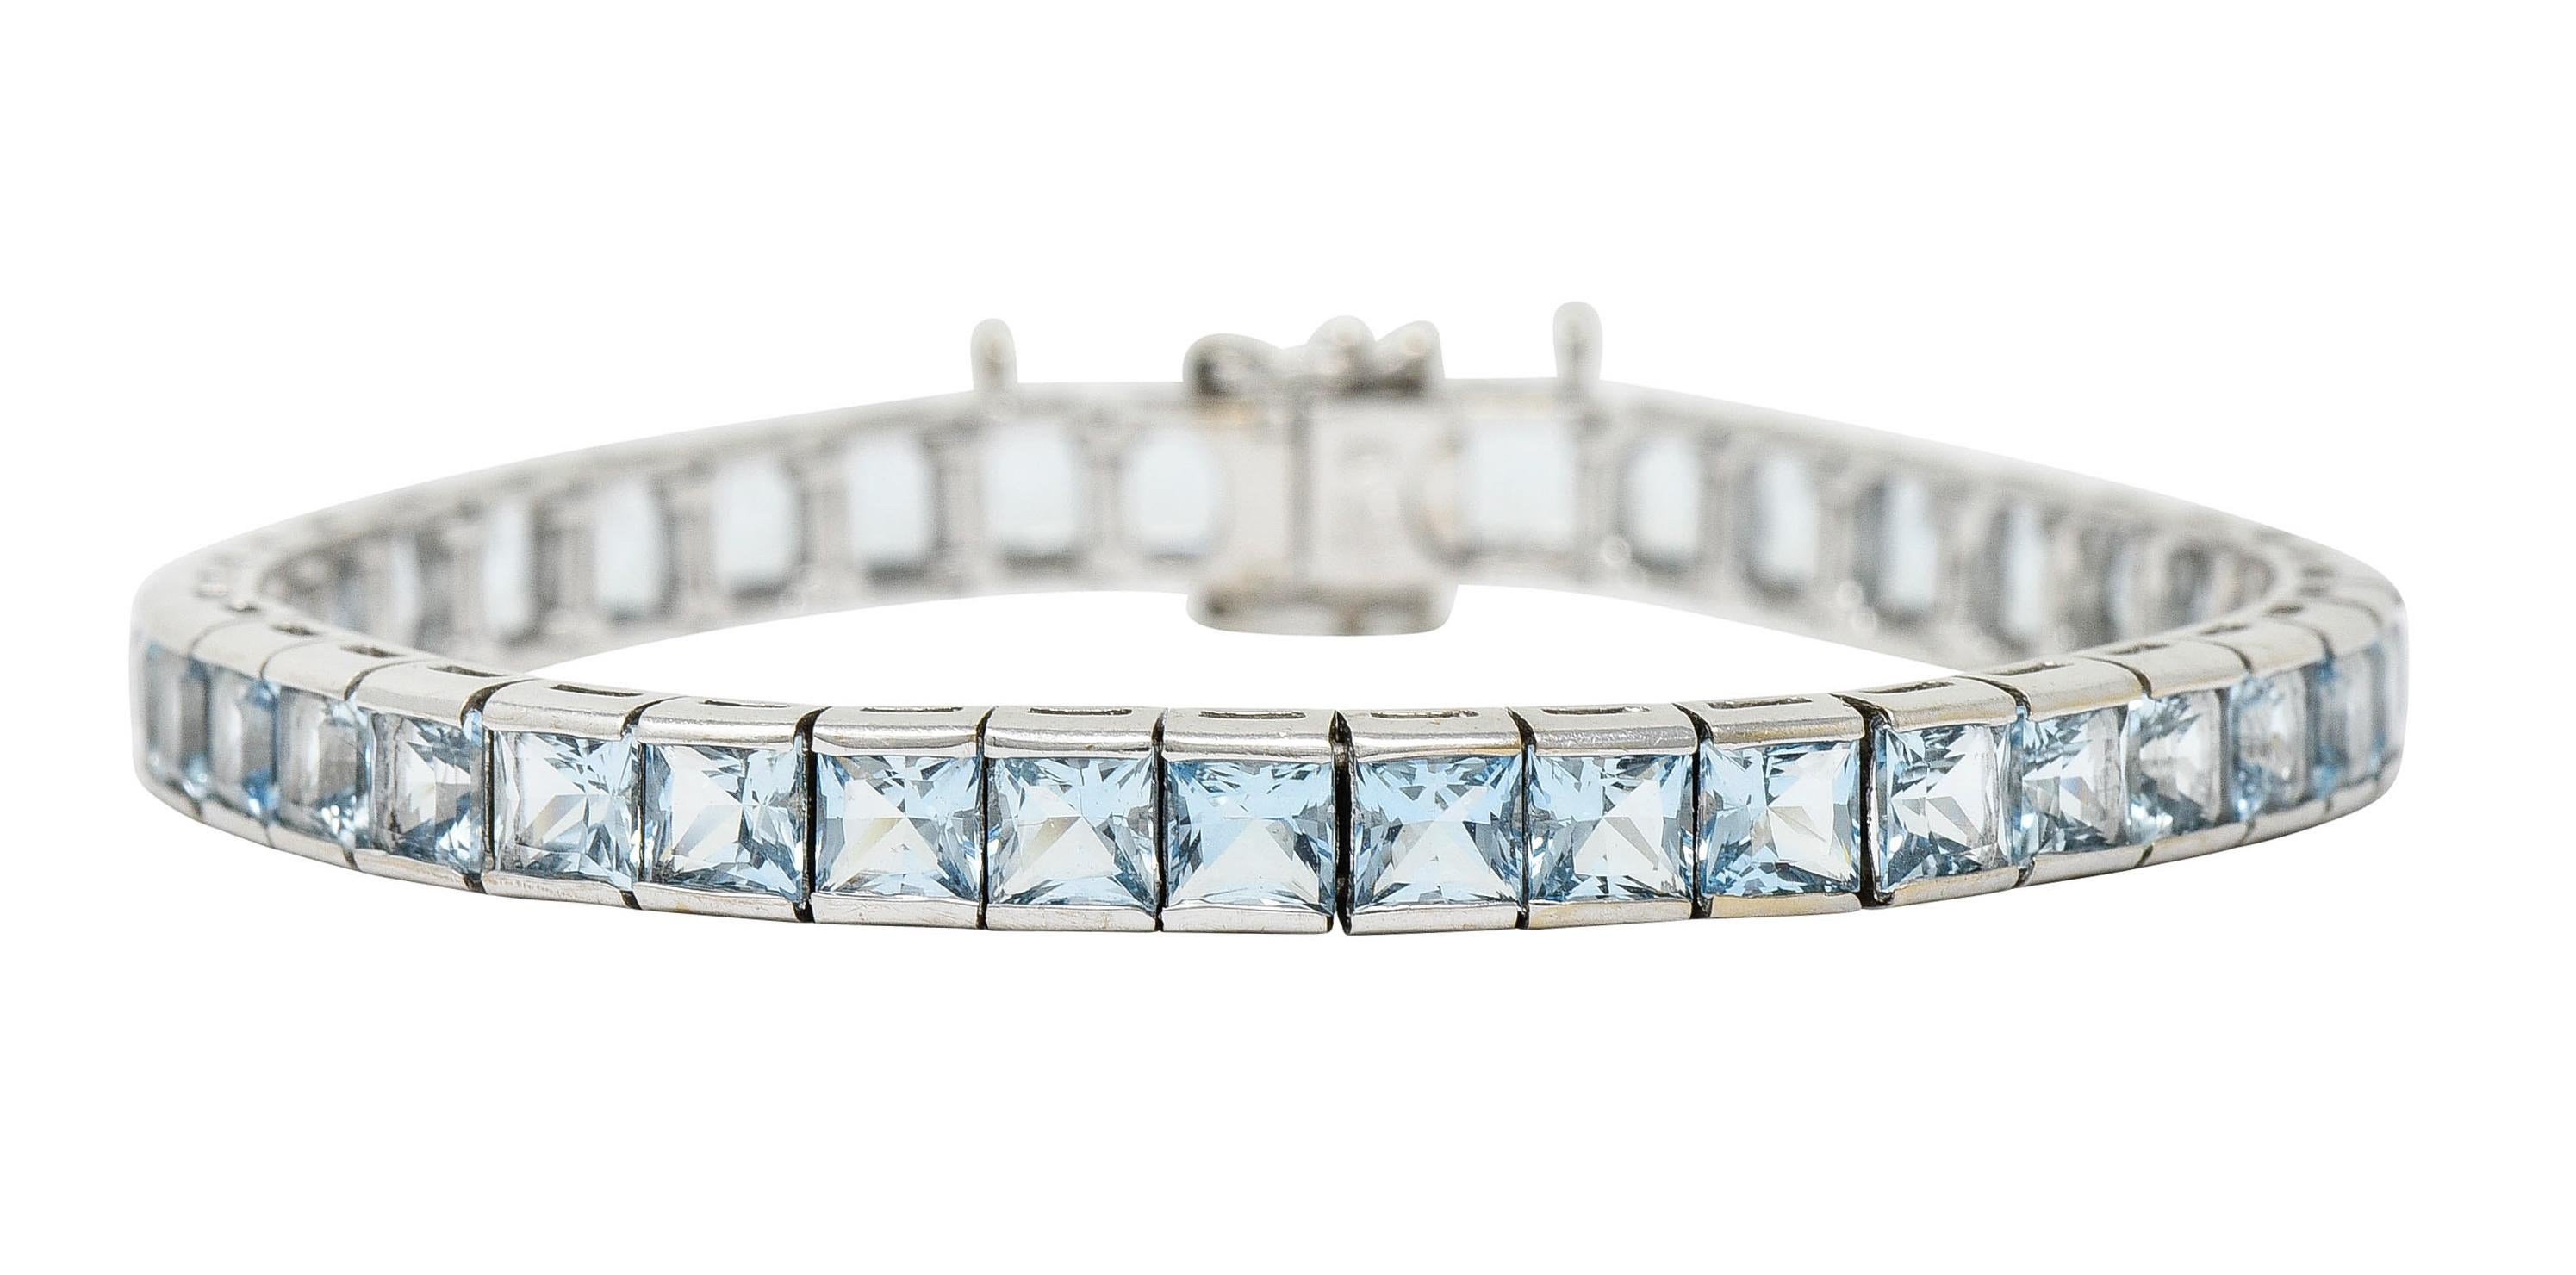 Line bracelet is comprised of square form links

Each set with square cut aquamarine weighing in total approximately 12.00 carats

Very well matched, transparent, and medium light greenish blue in color

Completed by a concealed clasp and two figure